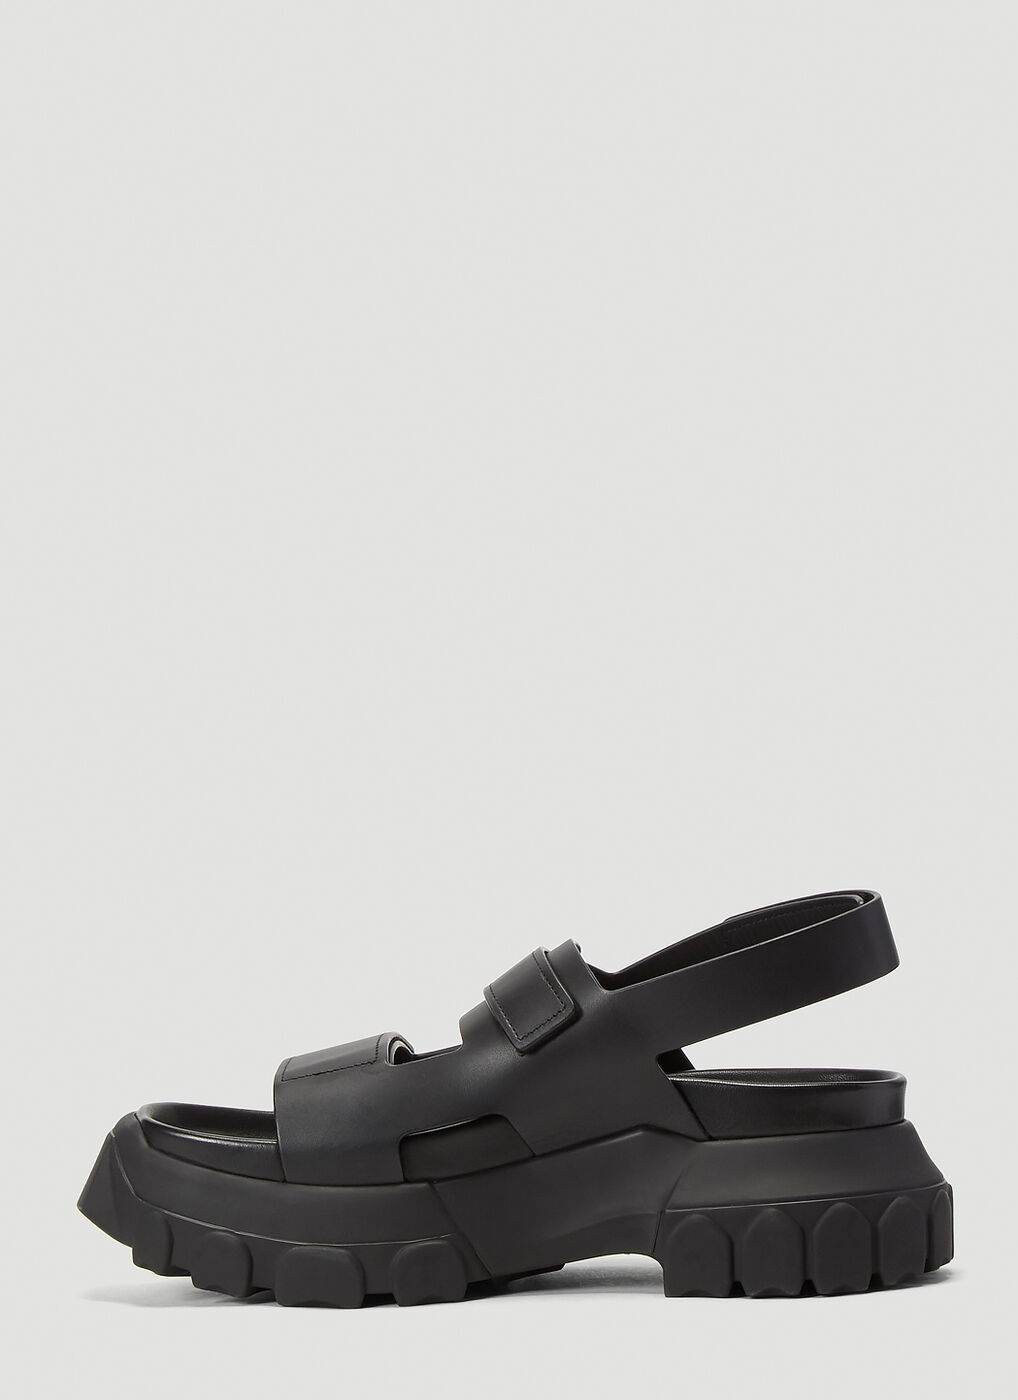 Tractor Leather Sandals in Black